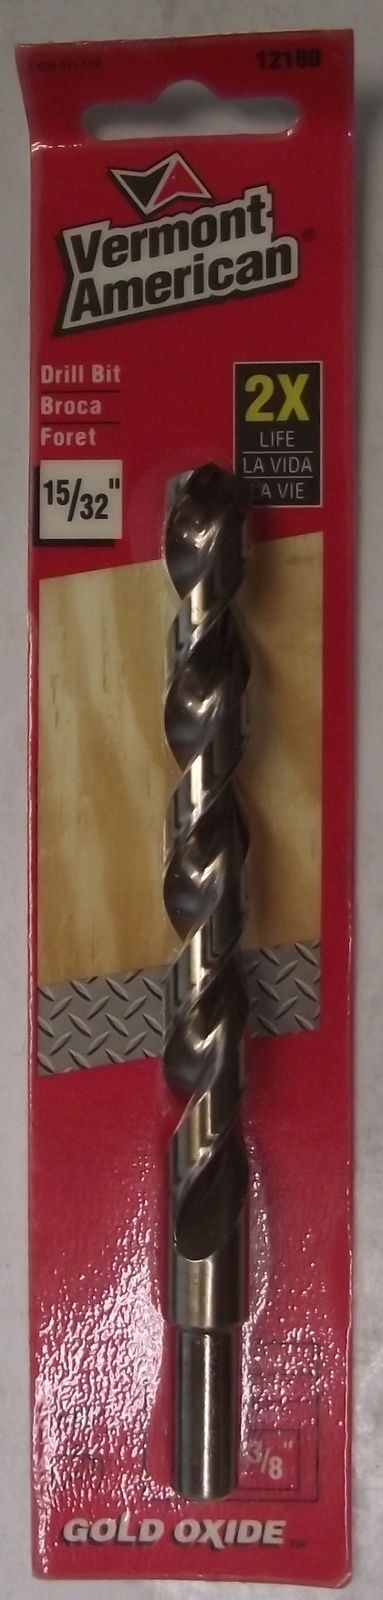 Vermont American 12180 15/32" Drill Bit Reduced Shank Gold Oxide